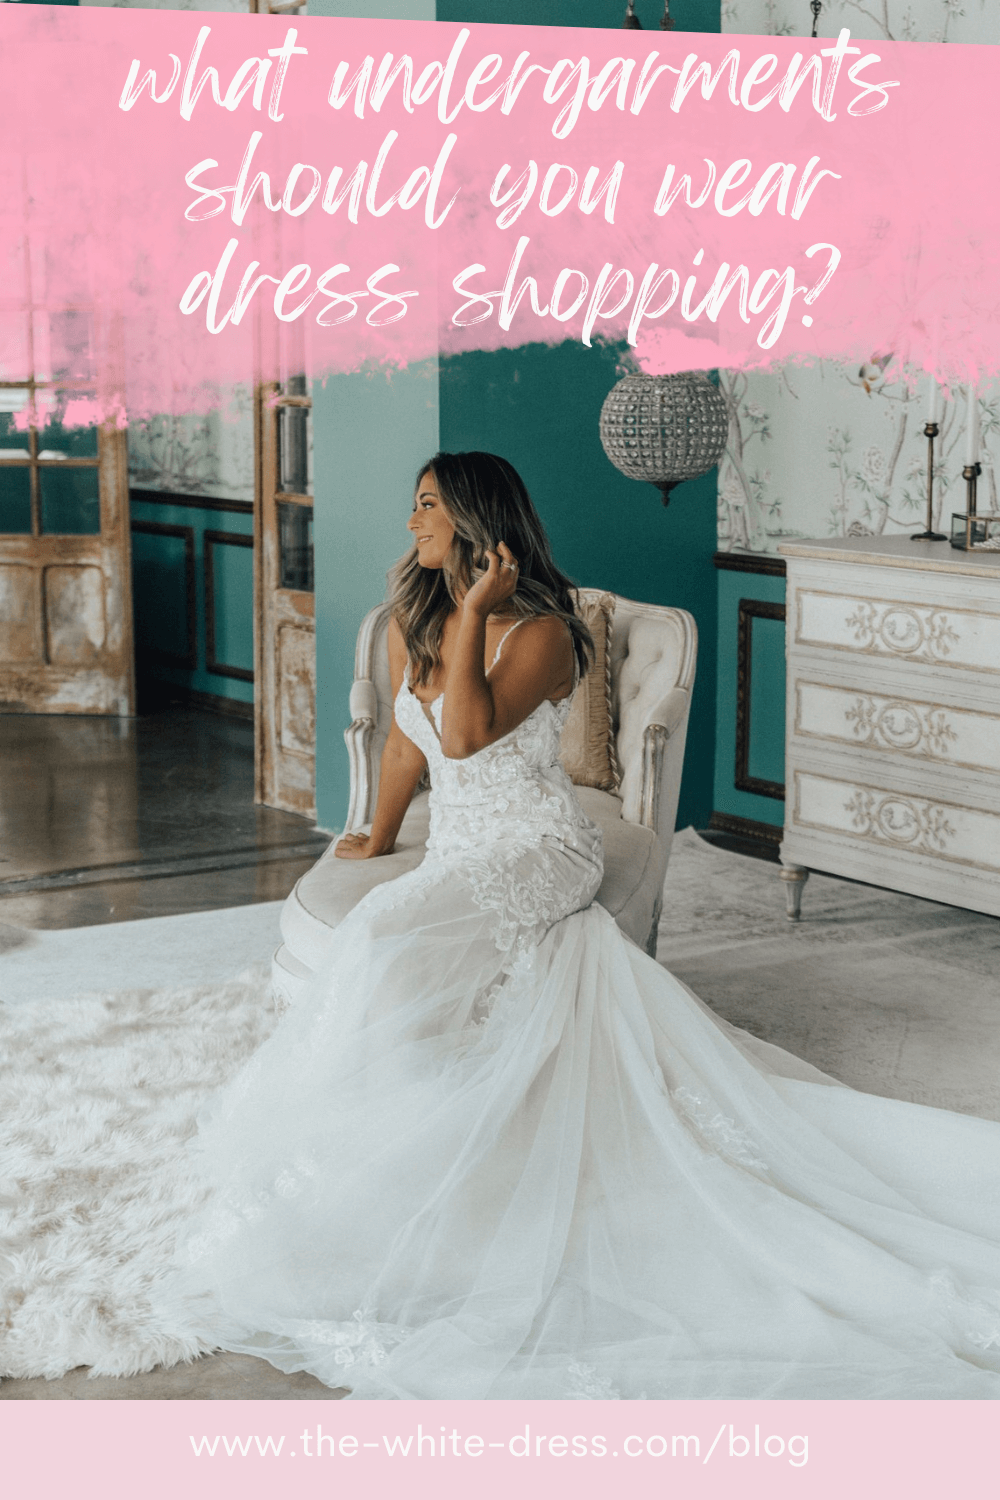 What Undergarments Should You Wear Wedding Dress Shopping? - The